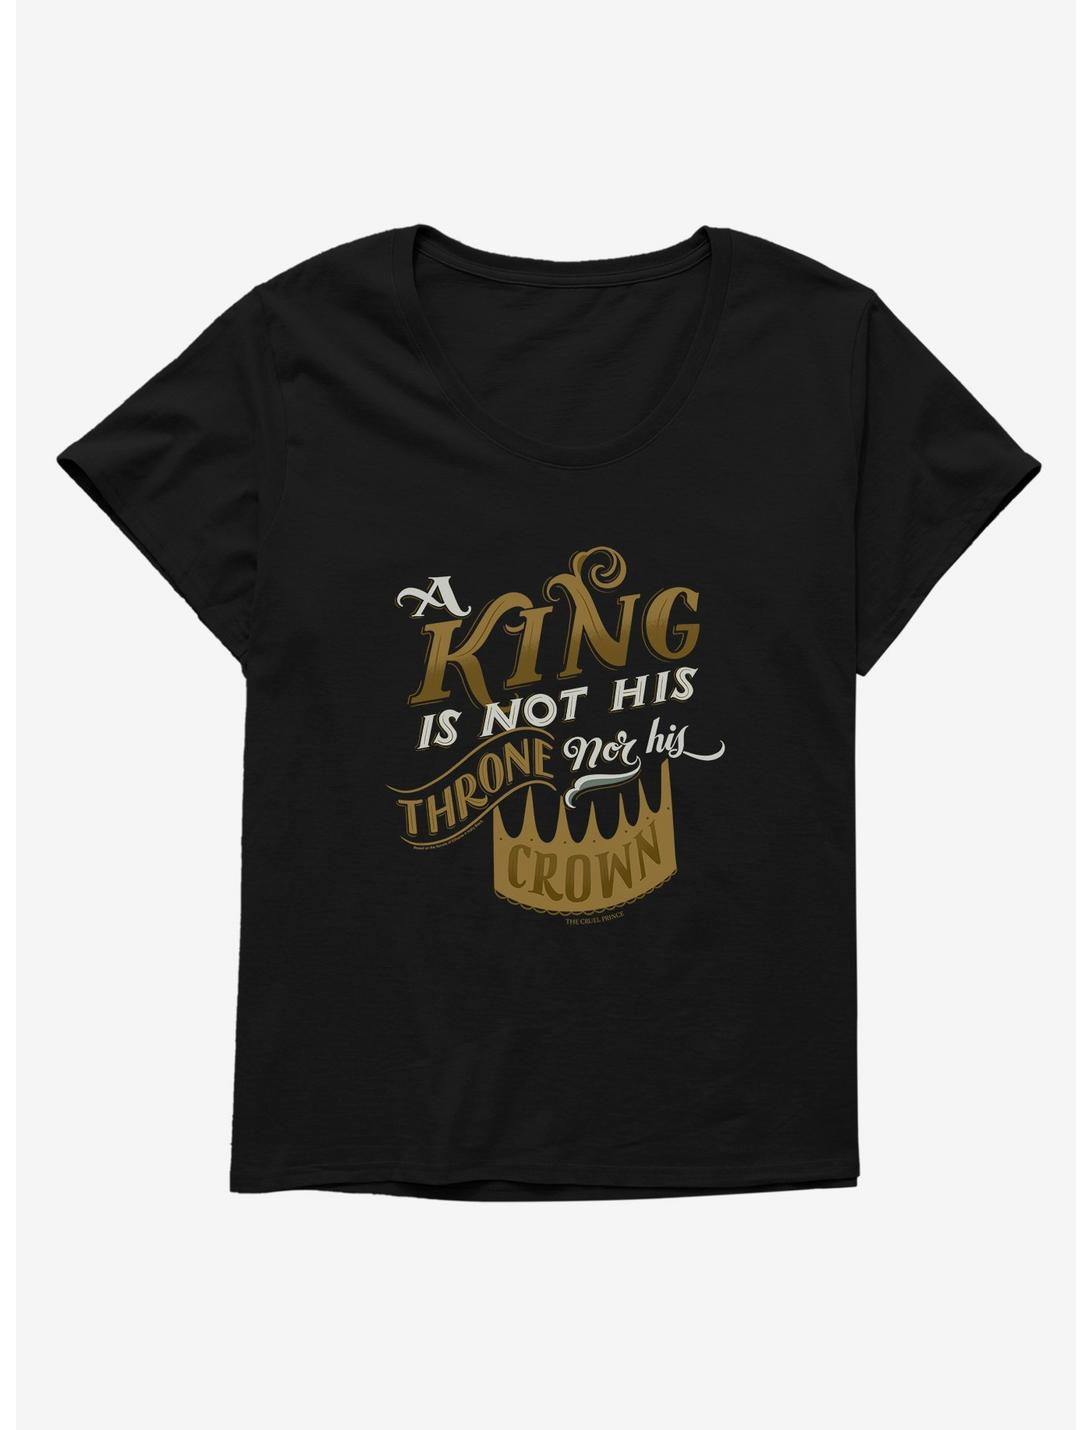 The Cruel Prince Sinister Enchantment Collection: King Is Not His Throne Nor Crown Womens T-Shirt Plus Size , BLACK, hi-res